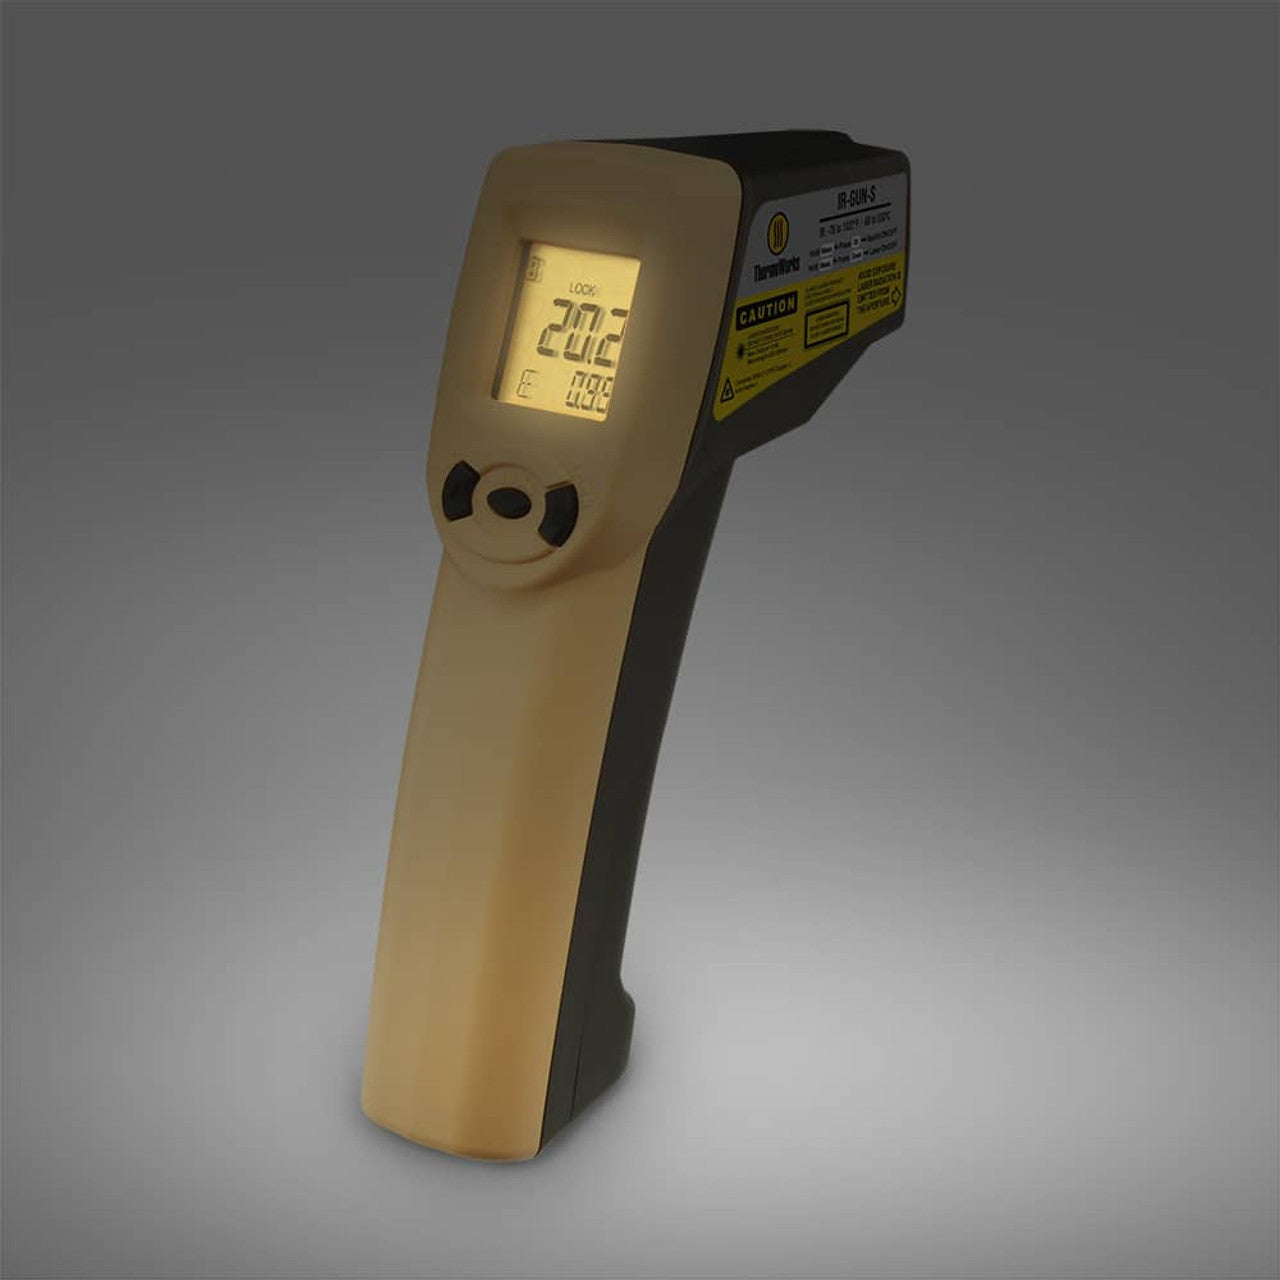 ThermoWorks Industrial Infrared Thermometer ThermoWorks Indigo Pool Patio BBQ